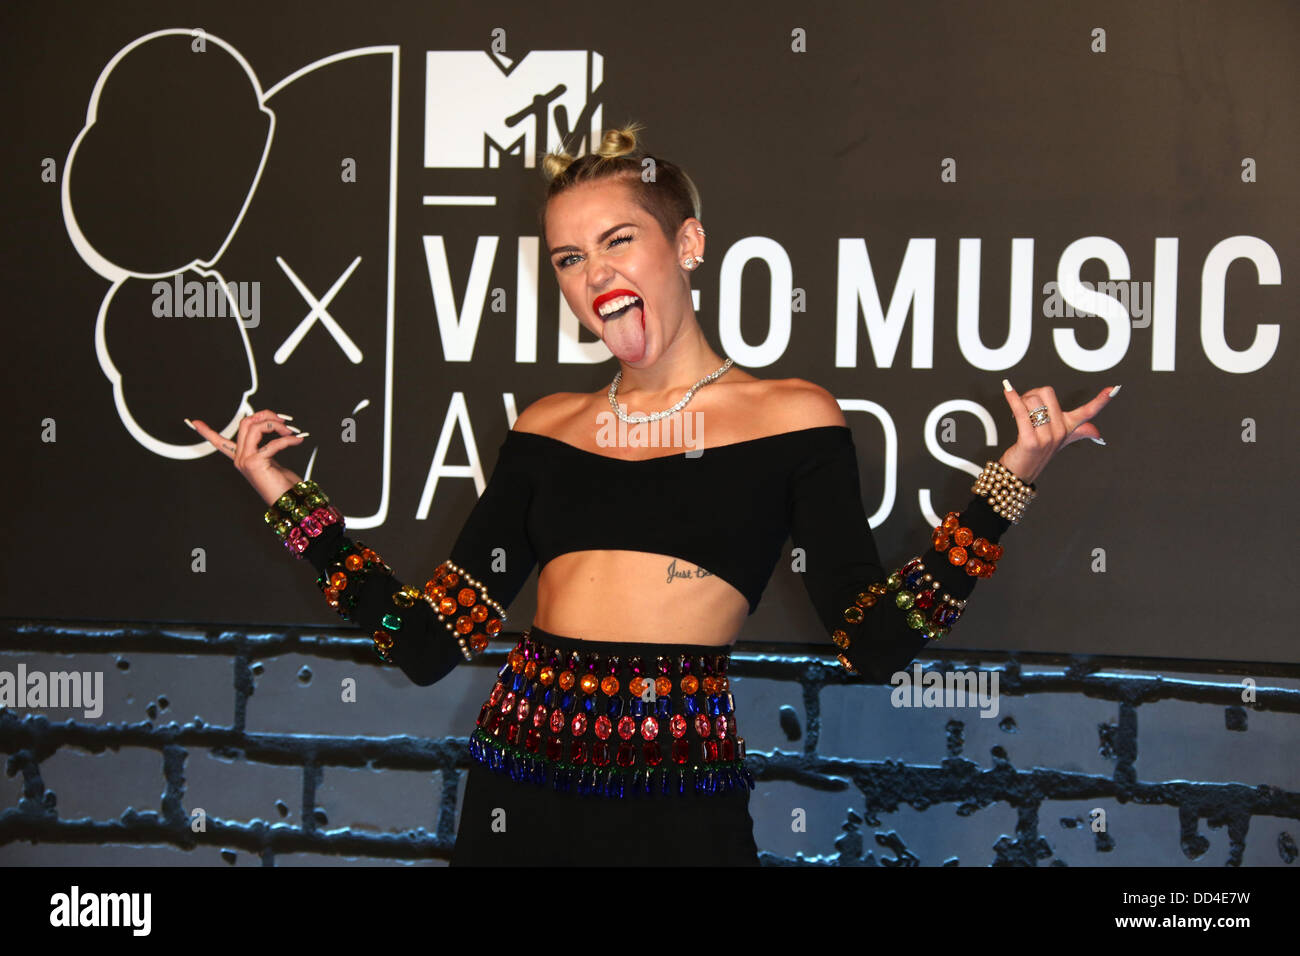 Brooklyn, New York, USA. 25th Aug, 2013. US singer Miley Cyrus arrives on the red carpet for the MTV Video Music Awards at the Barclays Center in Brooklyn, New York, USA, 25 August 2013. Photo: Hubert Boesl/dpa/Alamy Live News Stock Photo